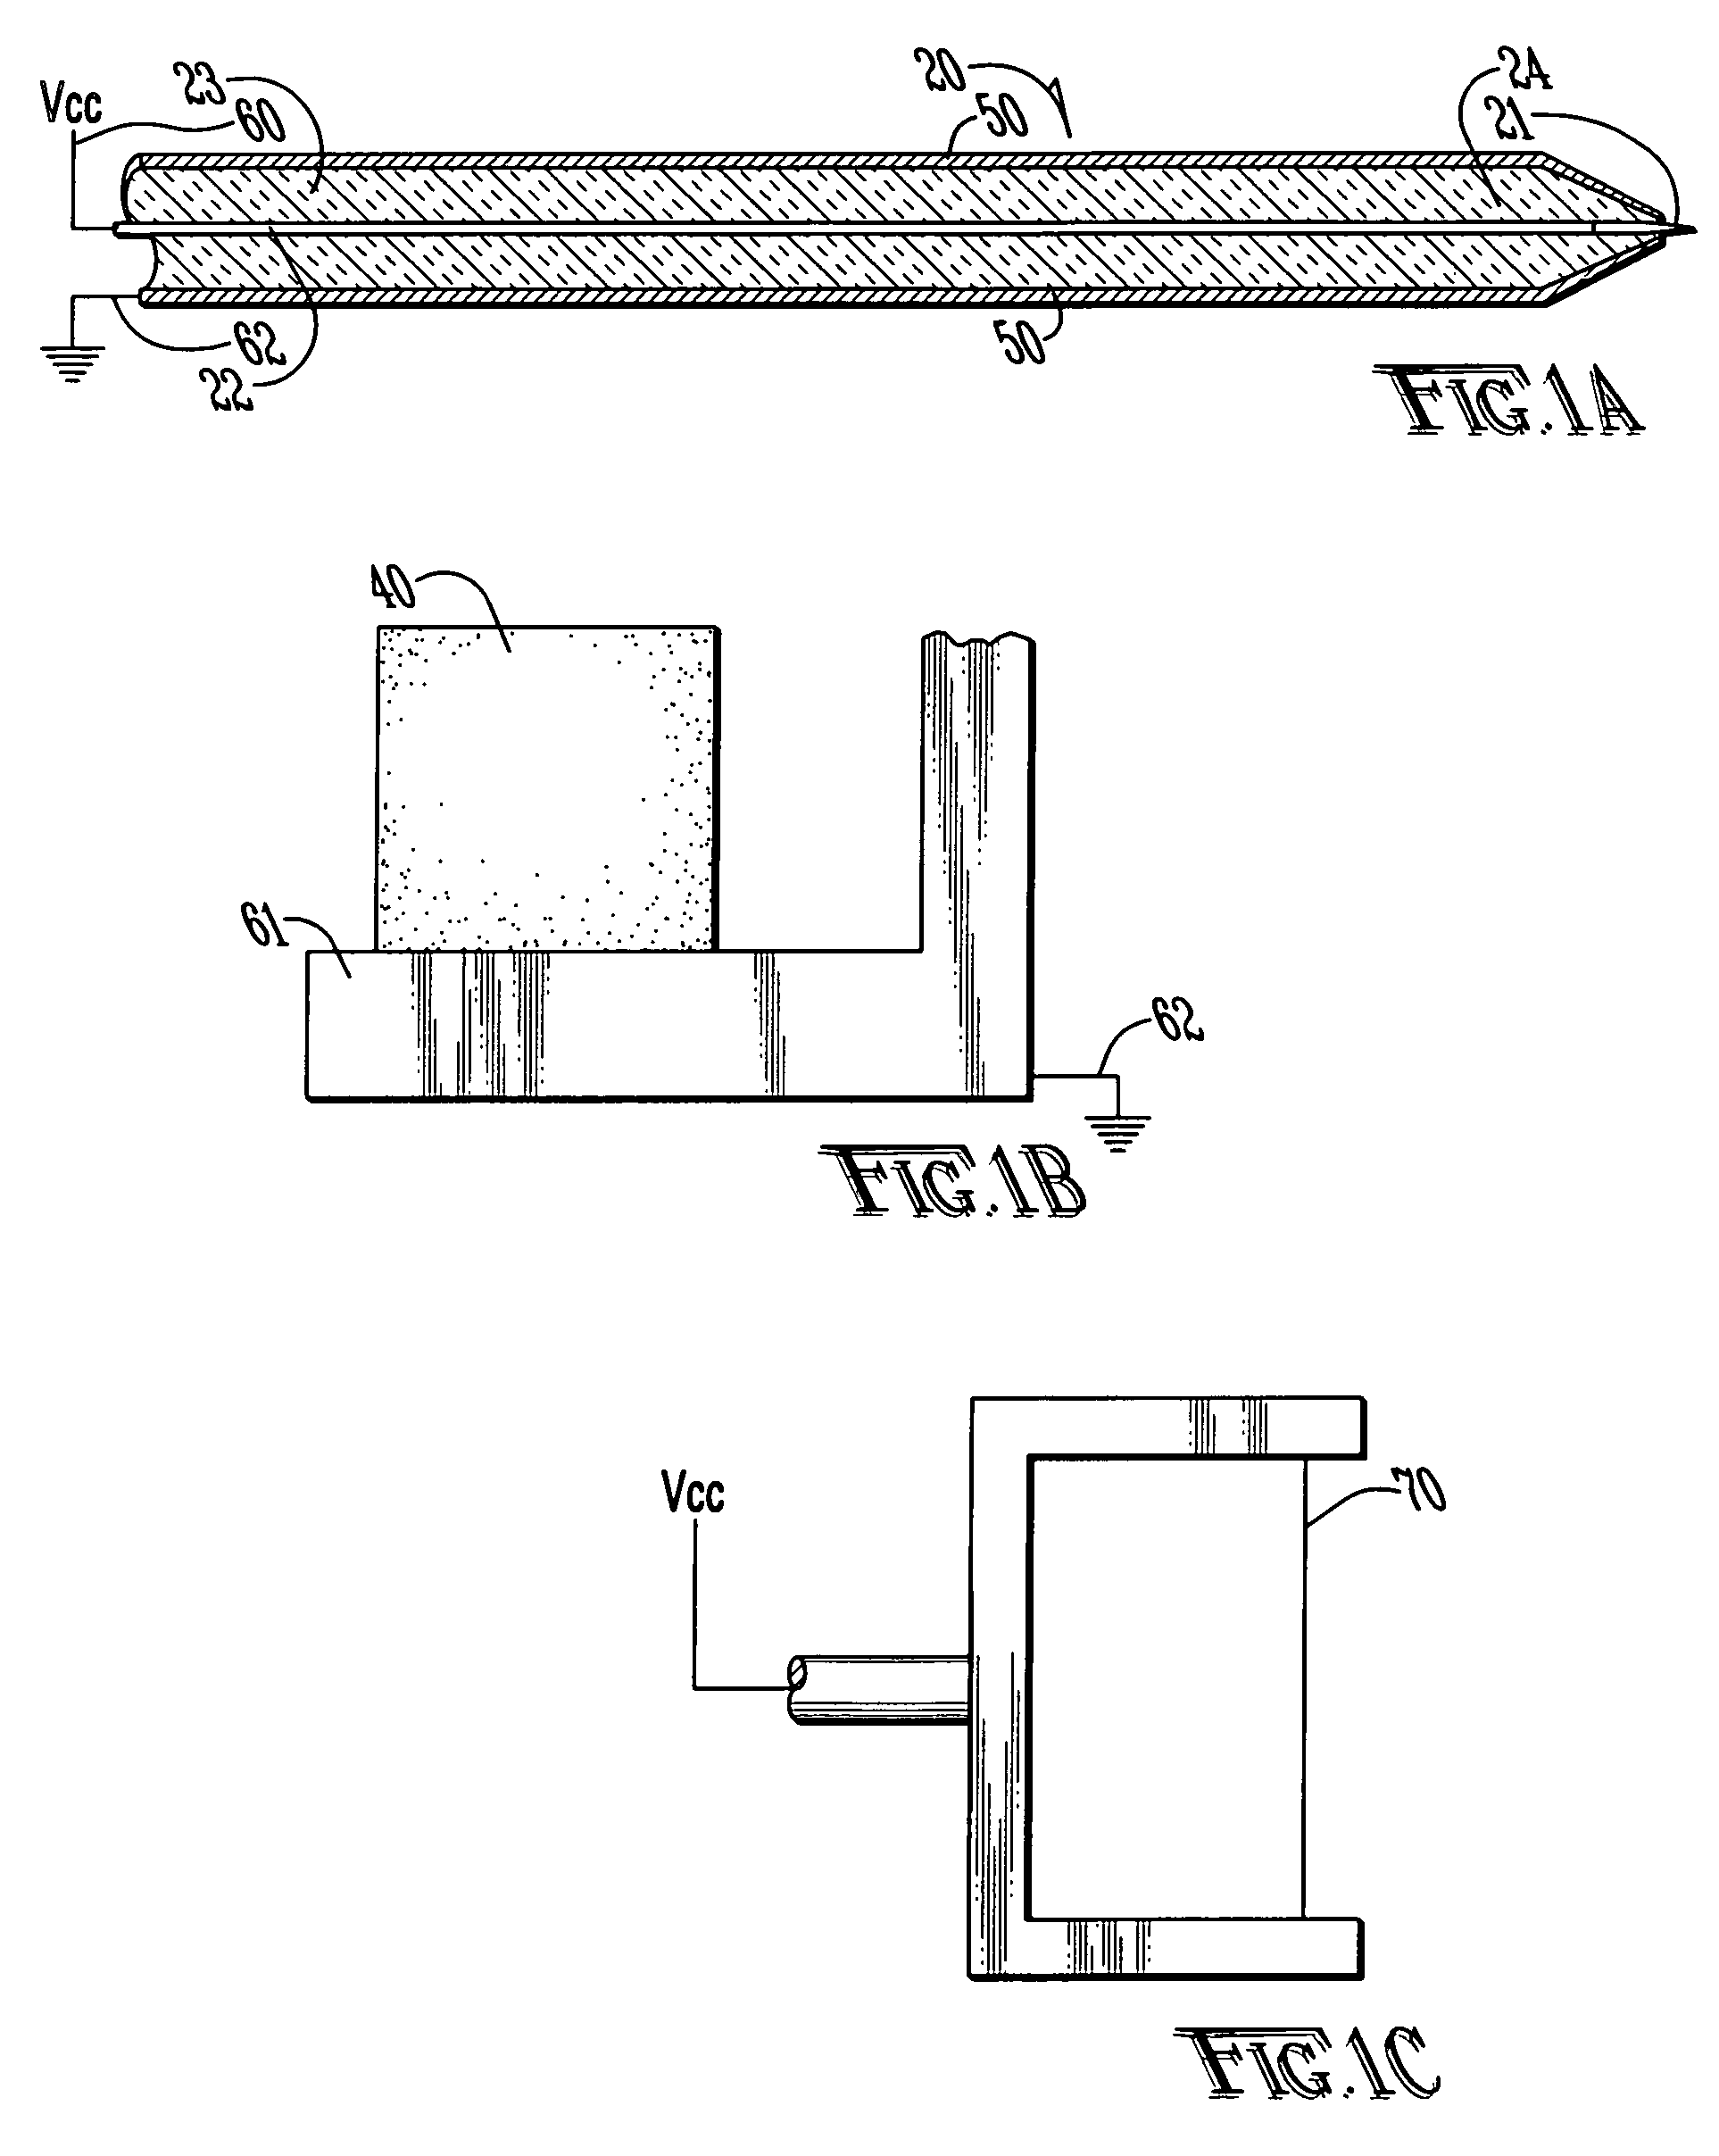 Tissue electro-sectioning apparatus